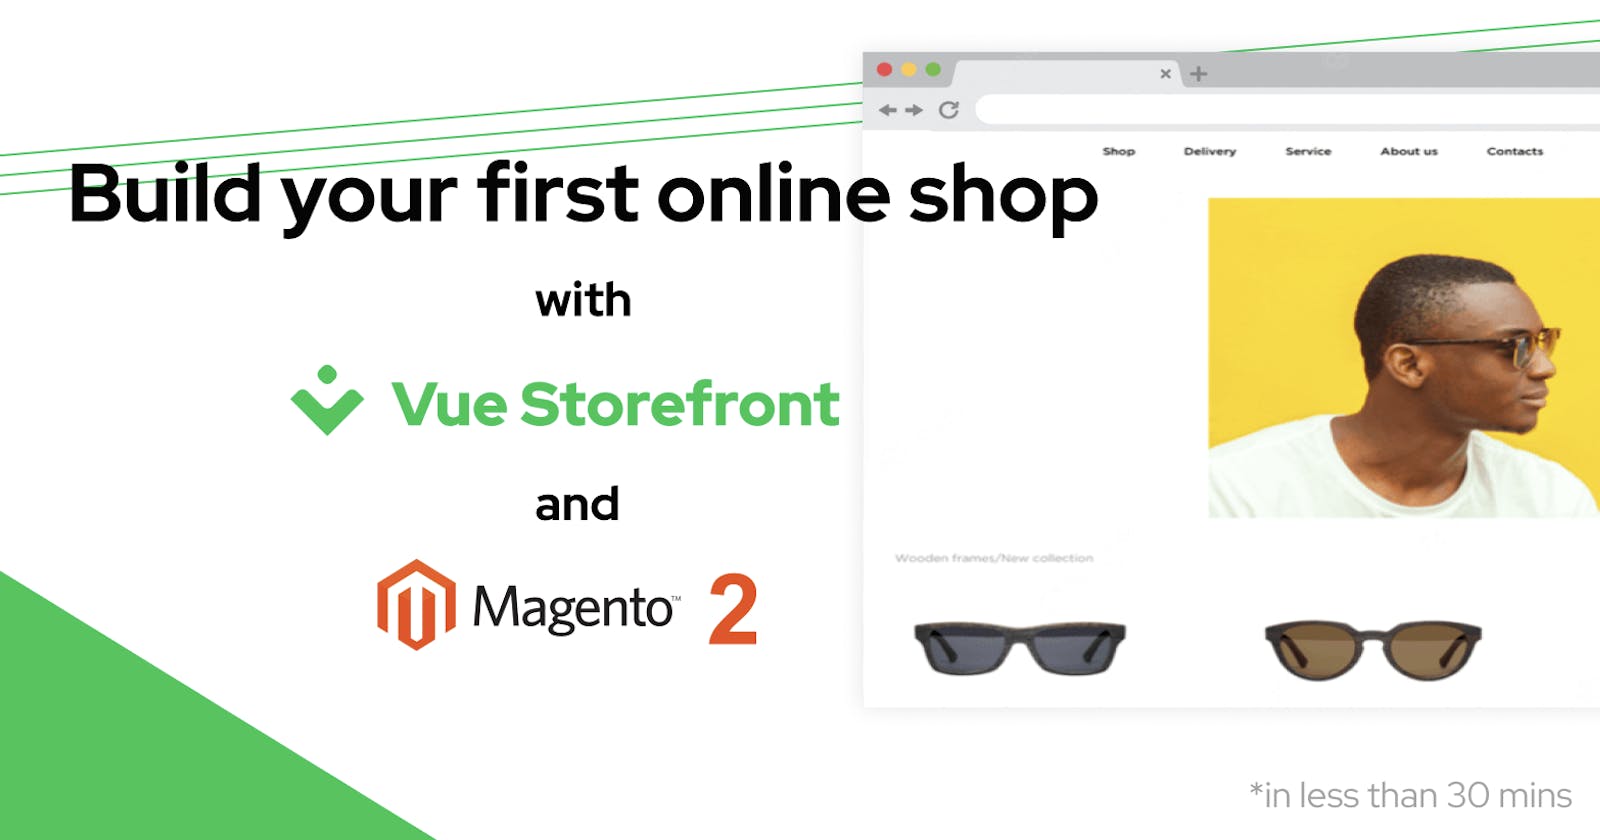 Build Your First Online Shop with Vue Storefront and Magento 2